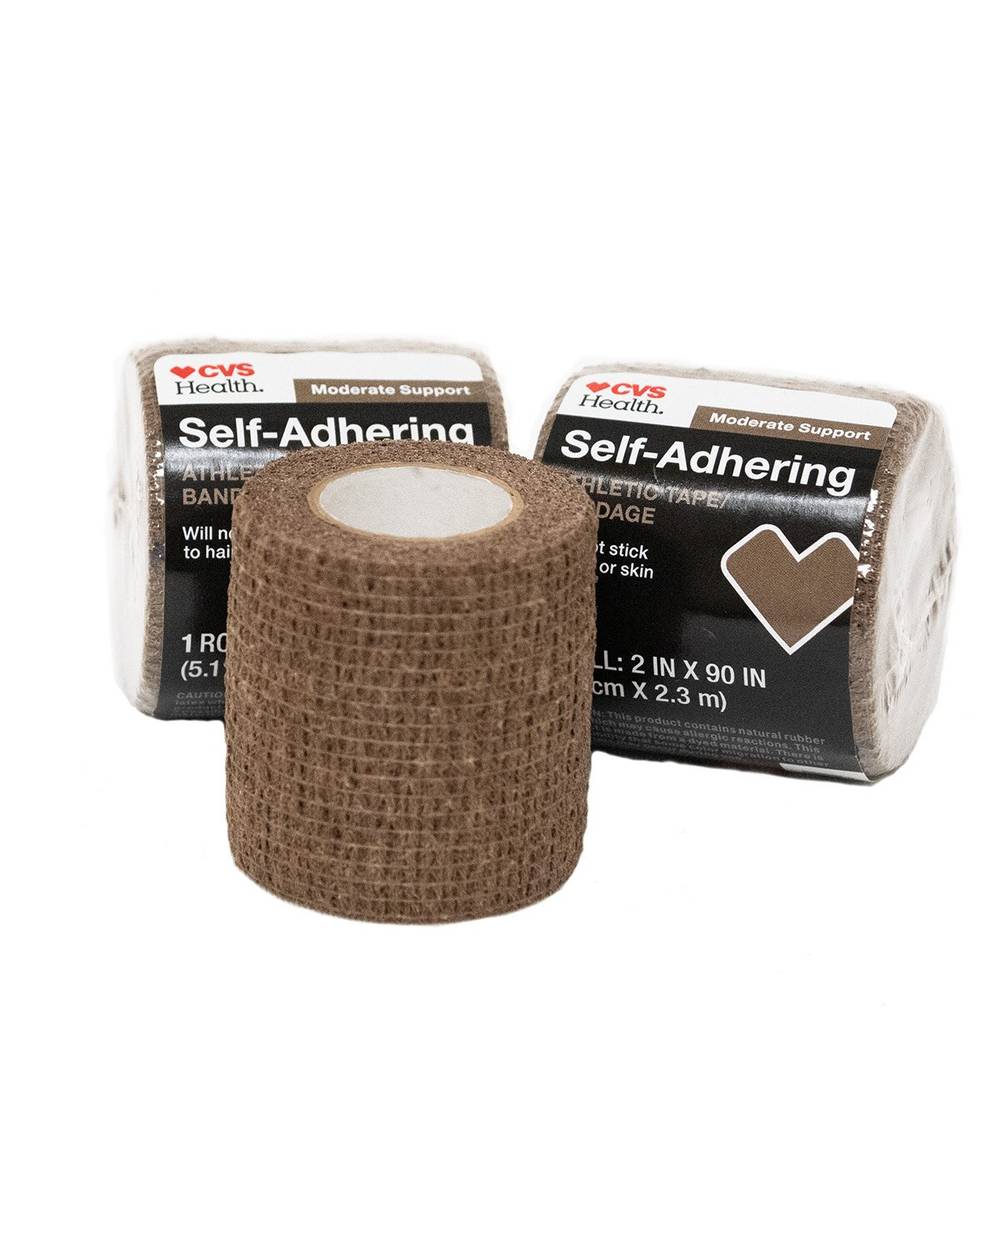 CVS Health Moderate Support Self-Adhering Athletic Tape